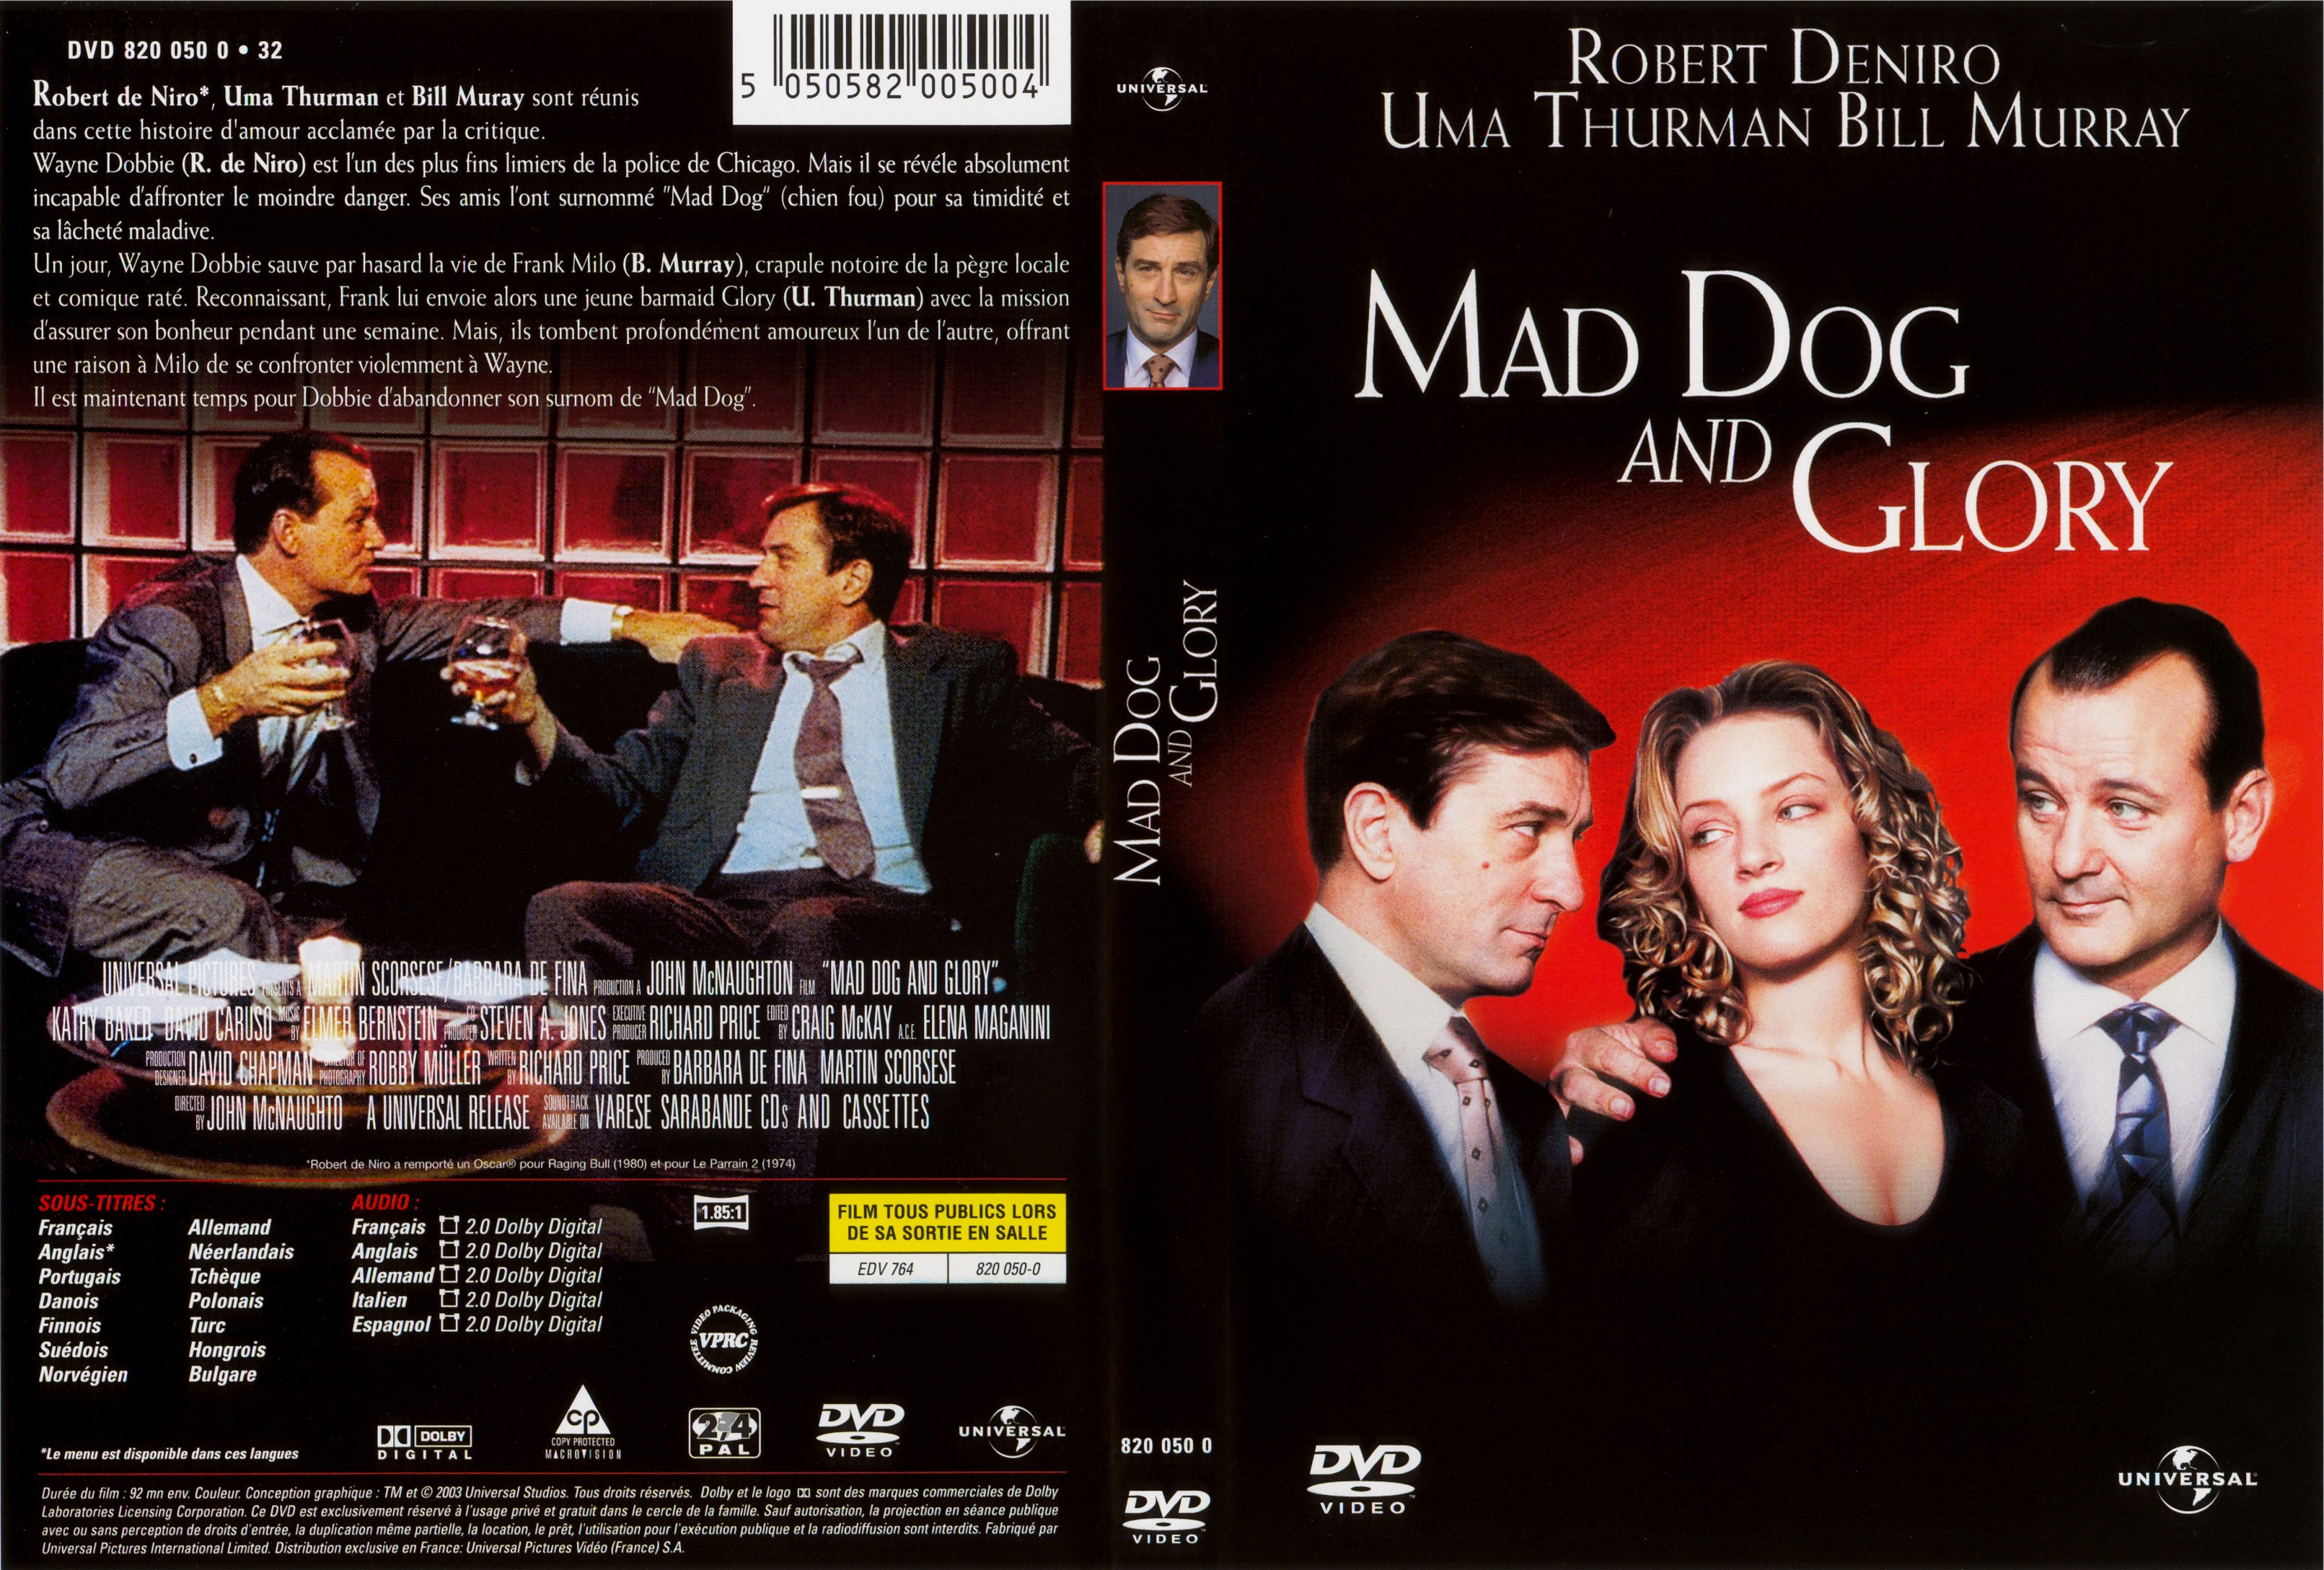 Jaquette DVD Mad dog and glory